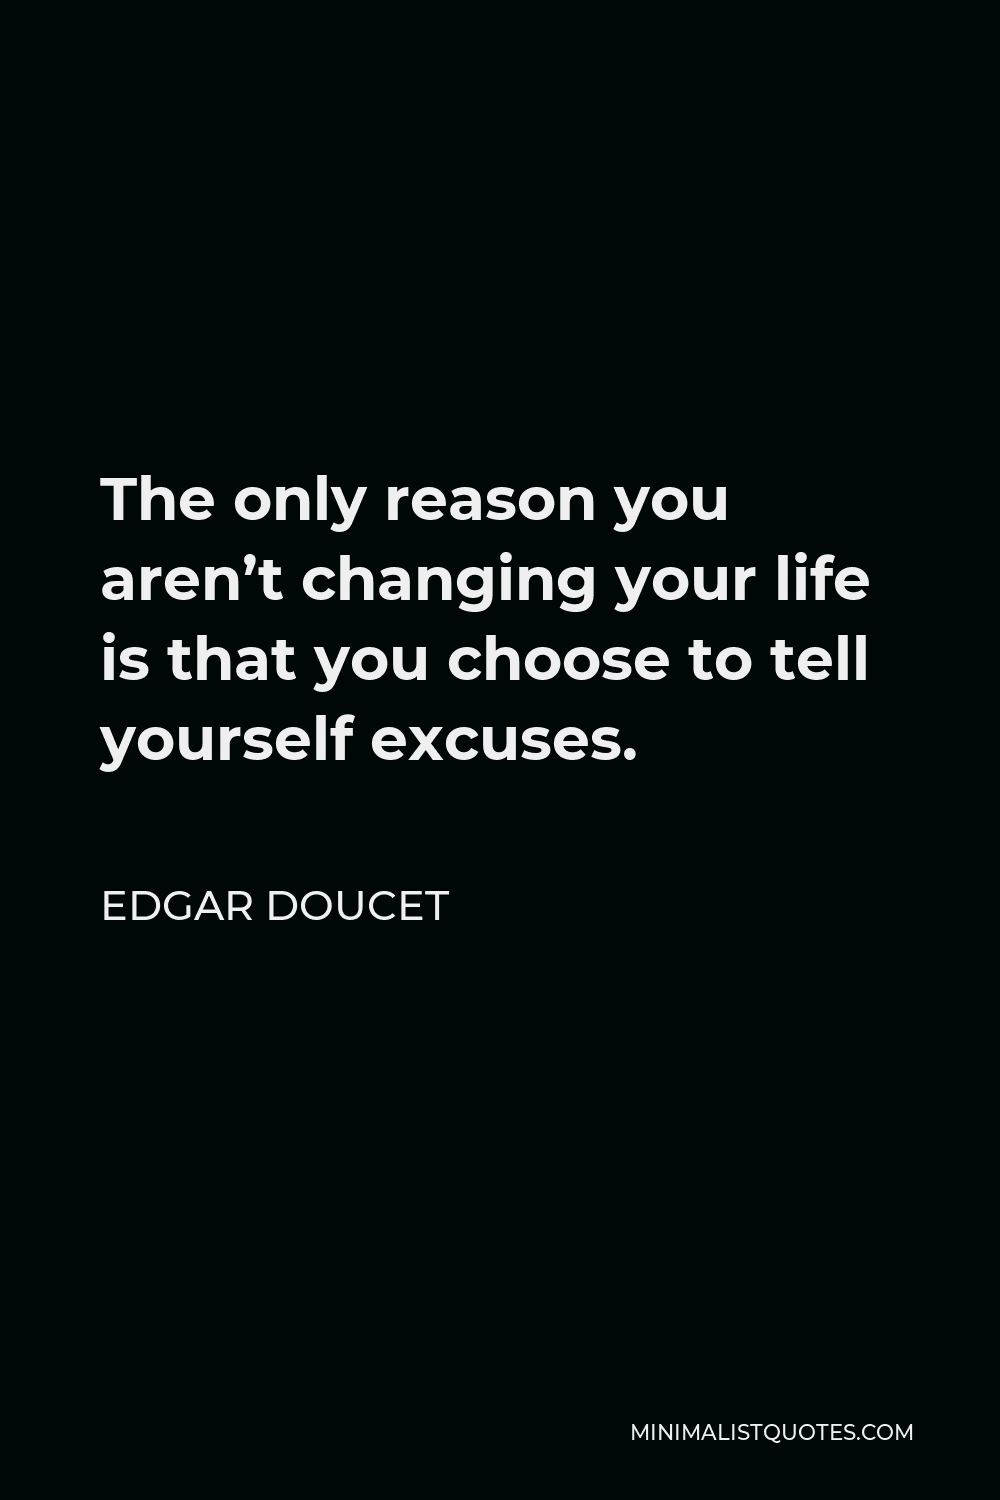 Edgar Doucet Quote - The only reason you aren’t changing your life is that you choose to tell yourself excuses.